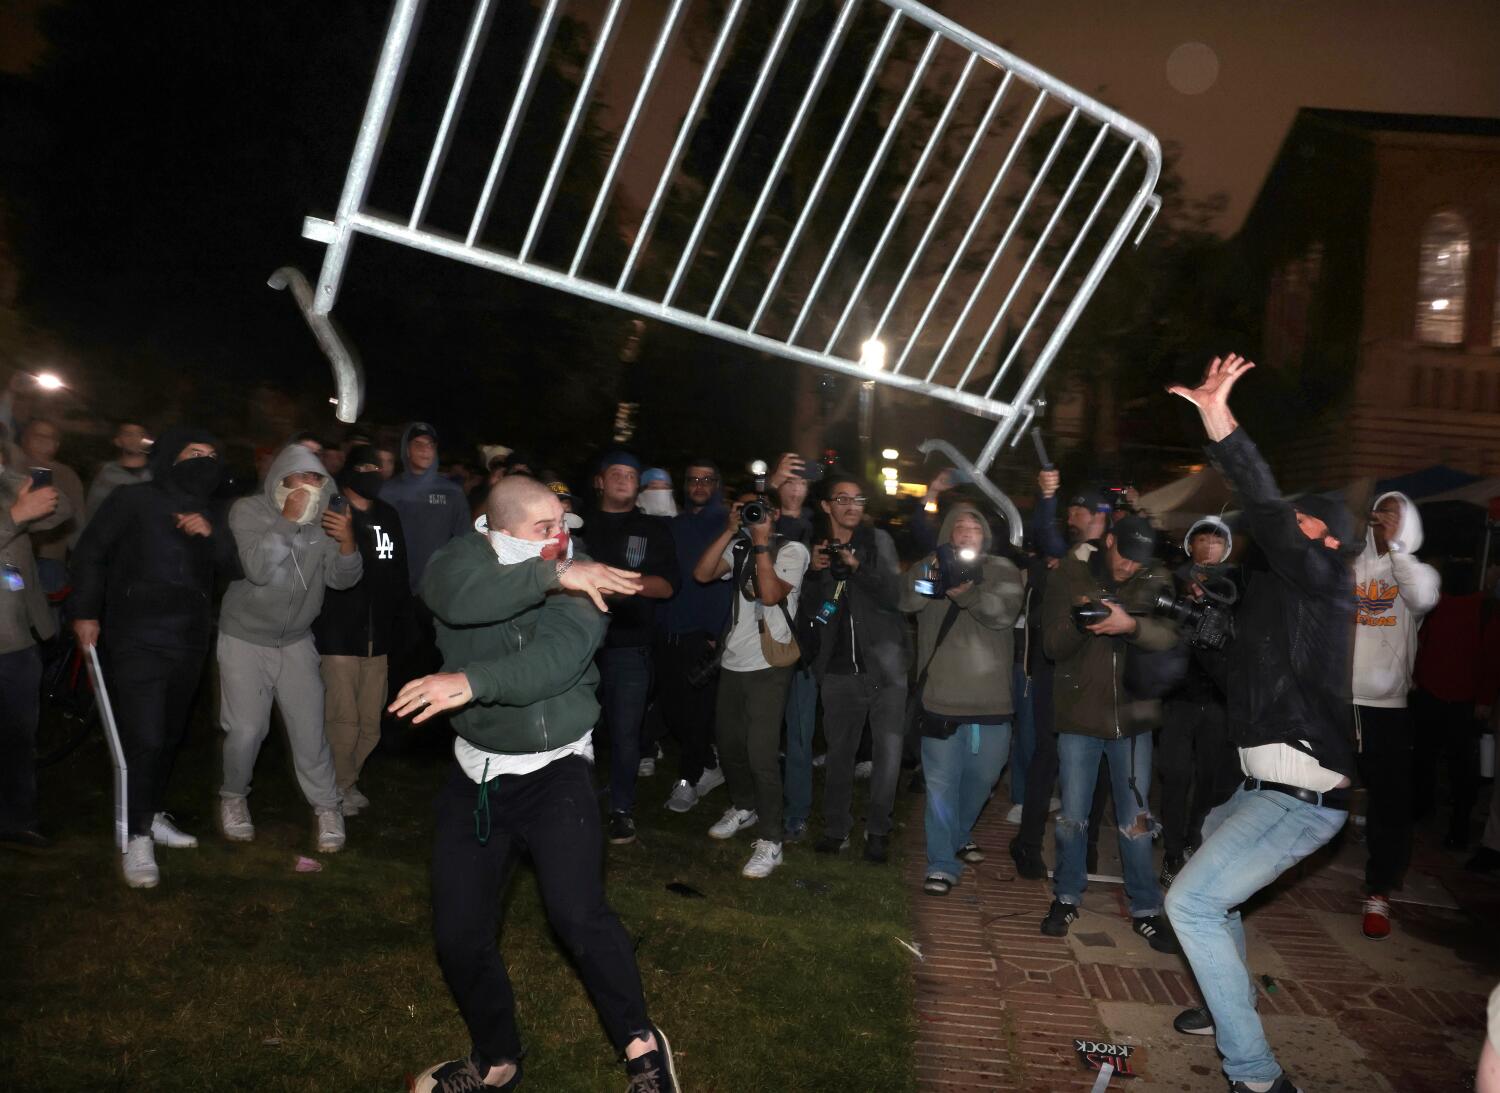 editorial:-the-attack-on-the-ucla-protest-encampment-was-unacceptable